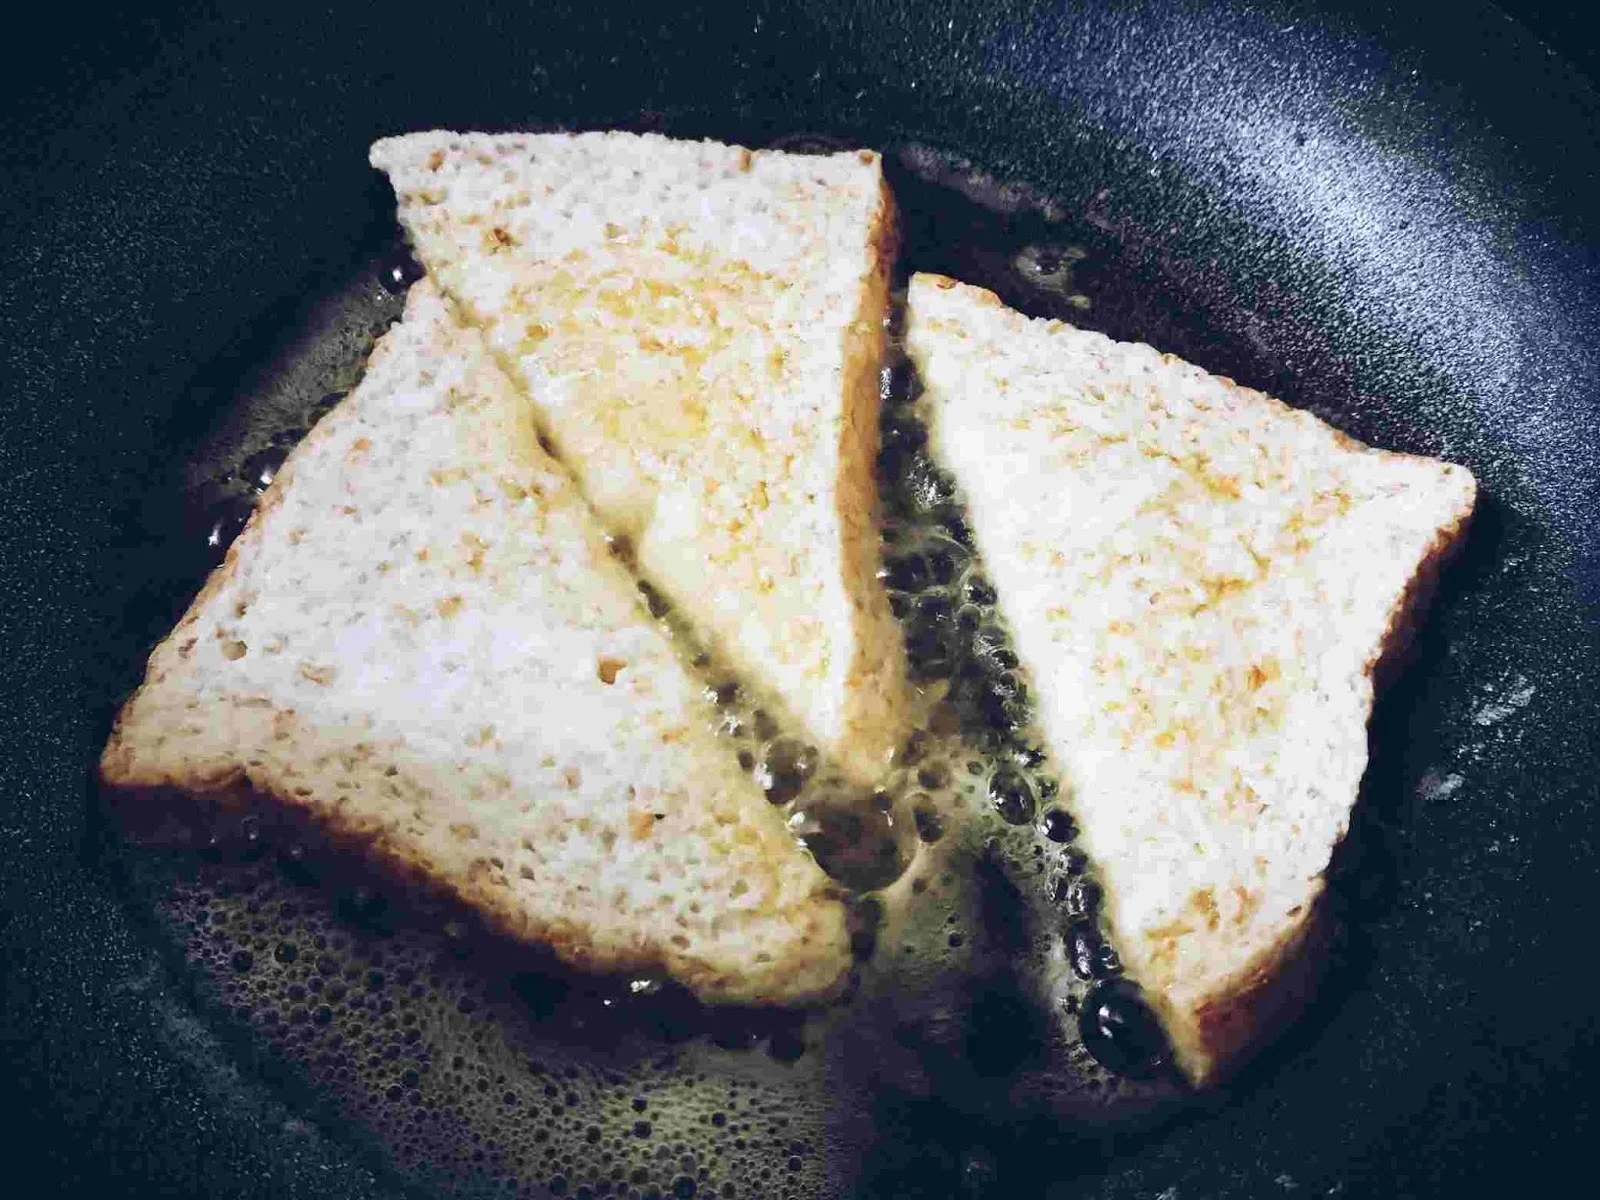 Bread soaked in milk and fried in olive oil and butter for a quick and easy french toast